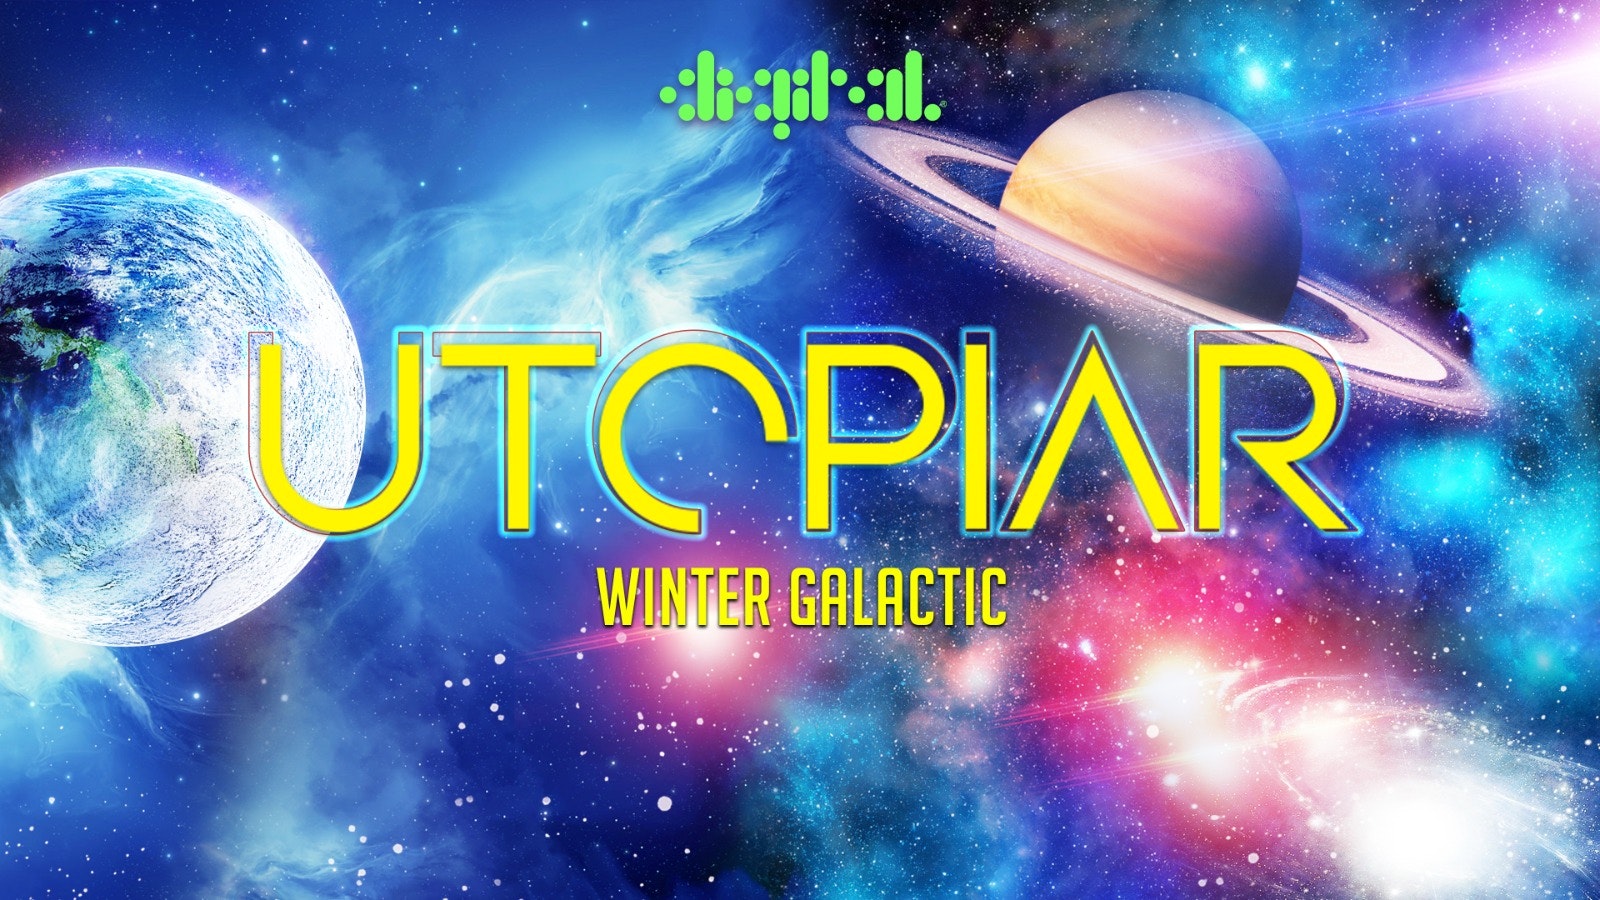 UTOPIAR REFRESHERS | THE WINTER GALACTIC  ❄️🛸 | 29th JANUARY